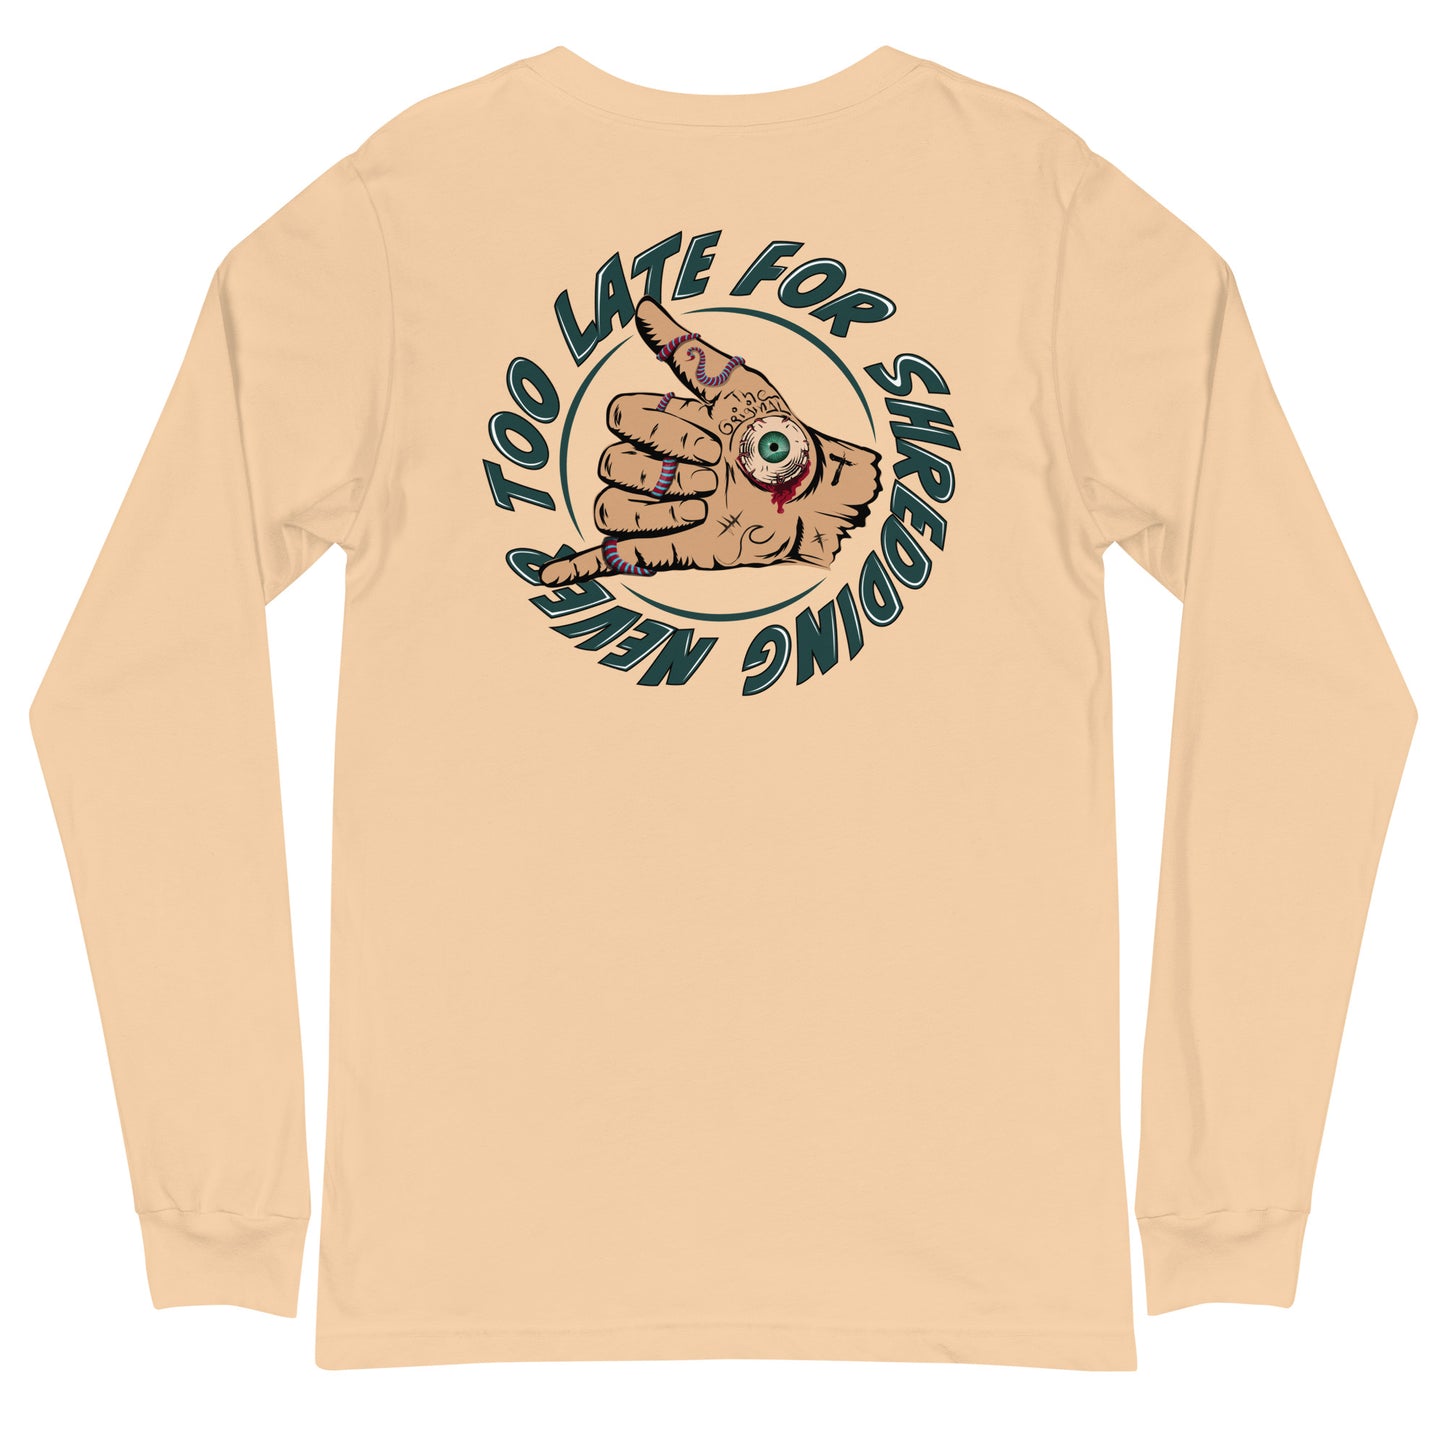 Long Sleeve surfing shaka hand Never Too Late style volcom, dos unisex couleur sable